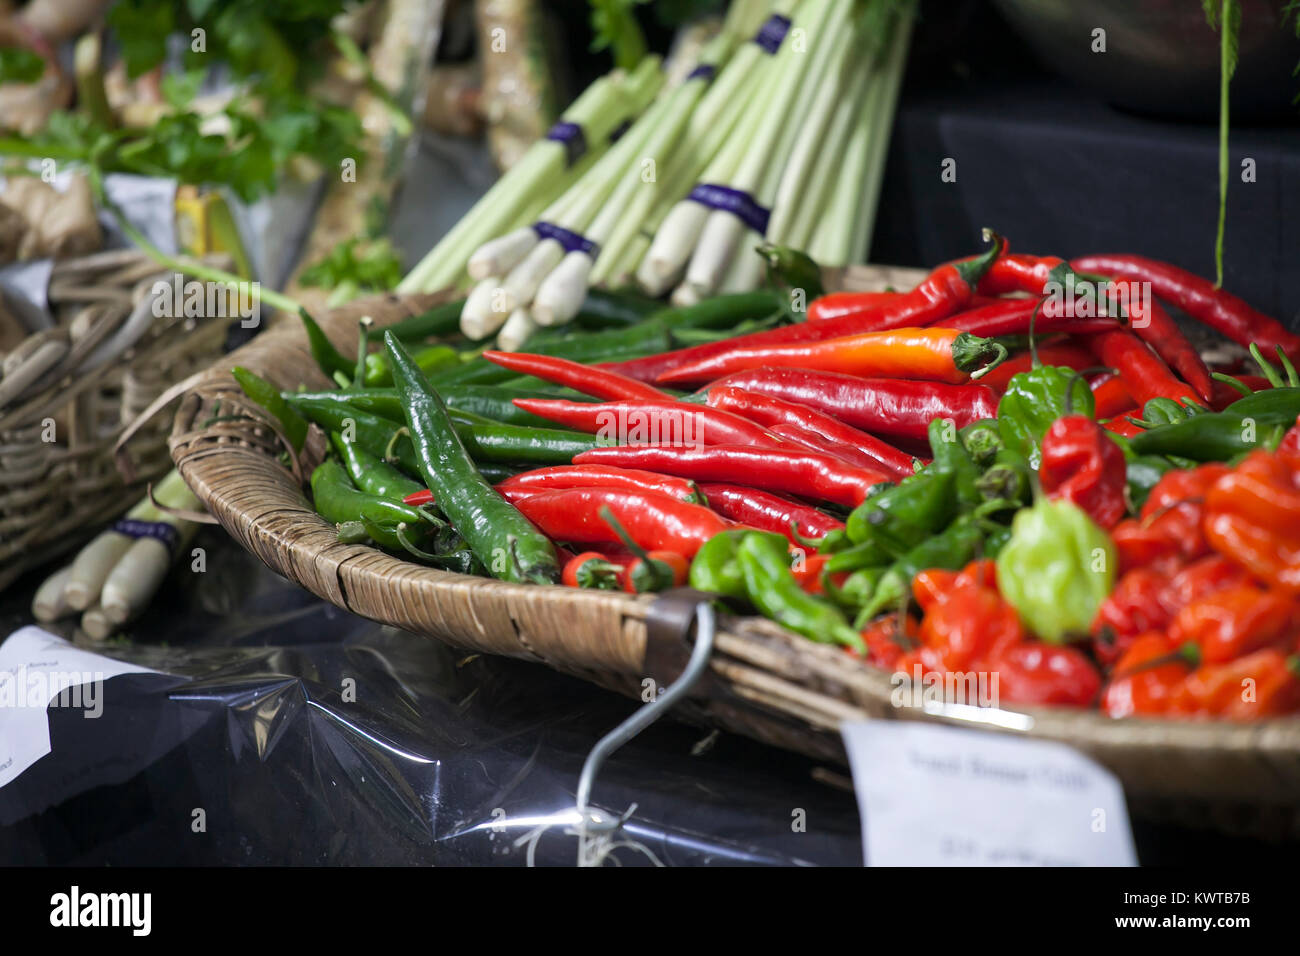 the Different types of pepper on the counter on the Borough market in London. Stock Photo